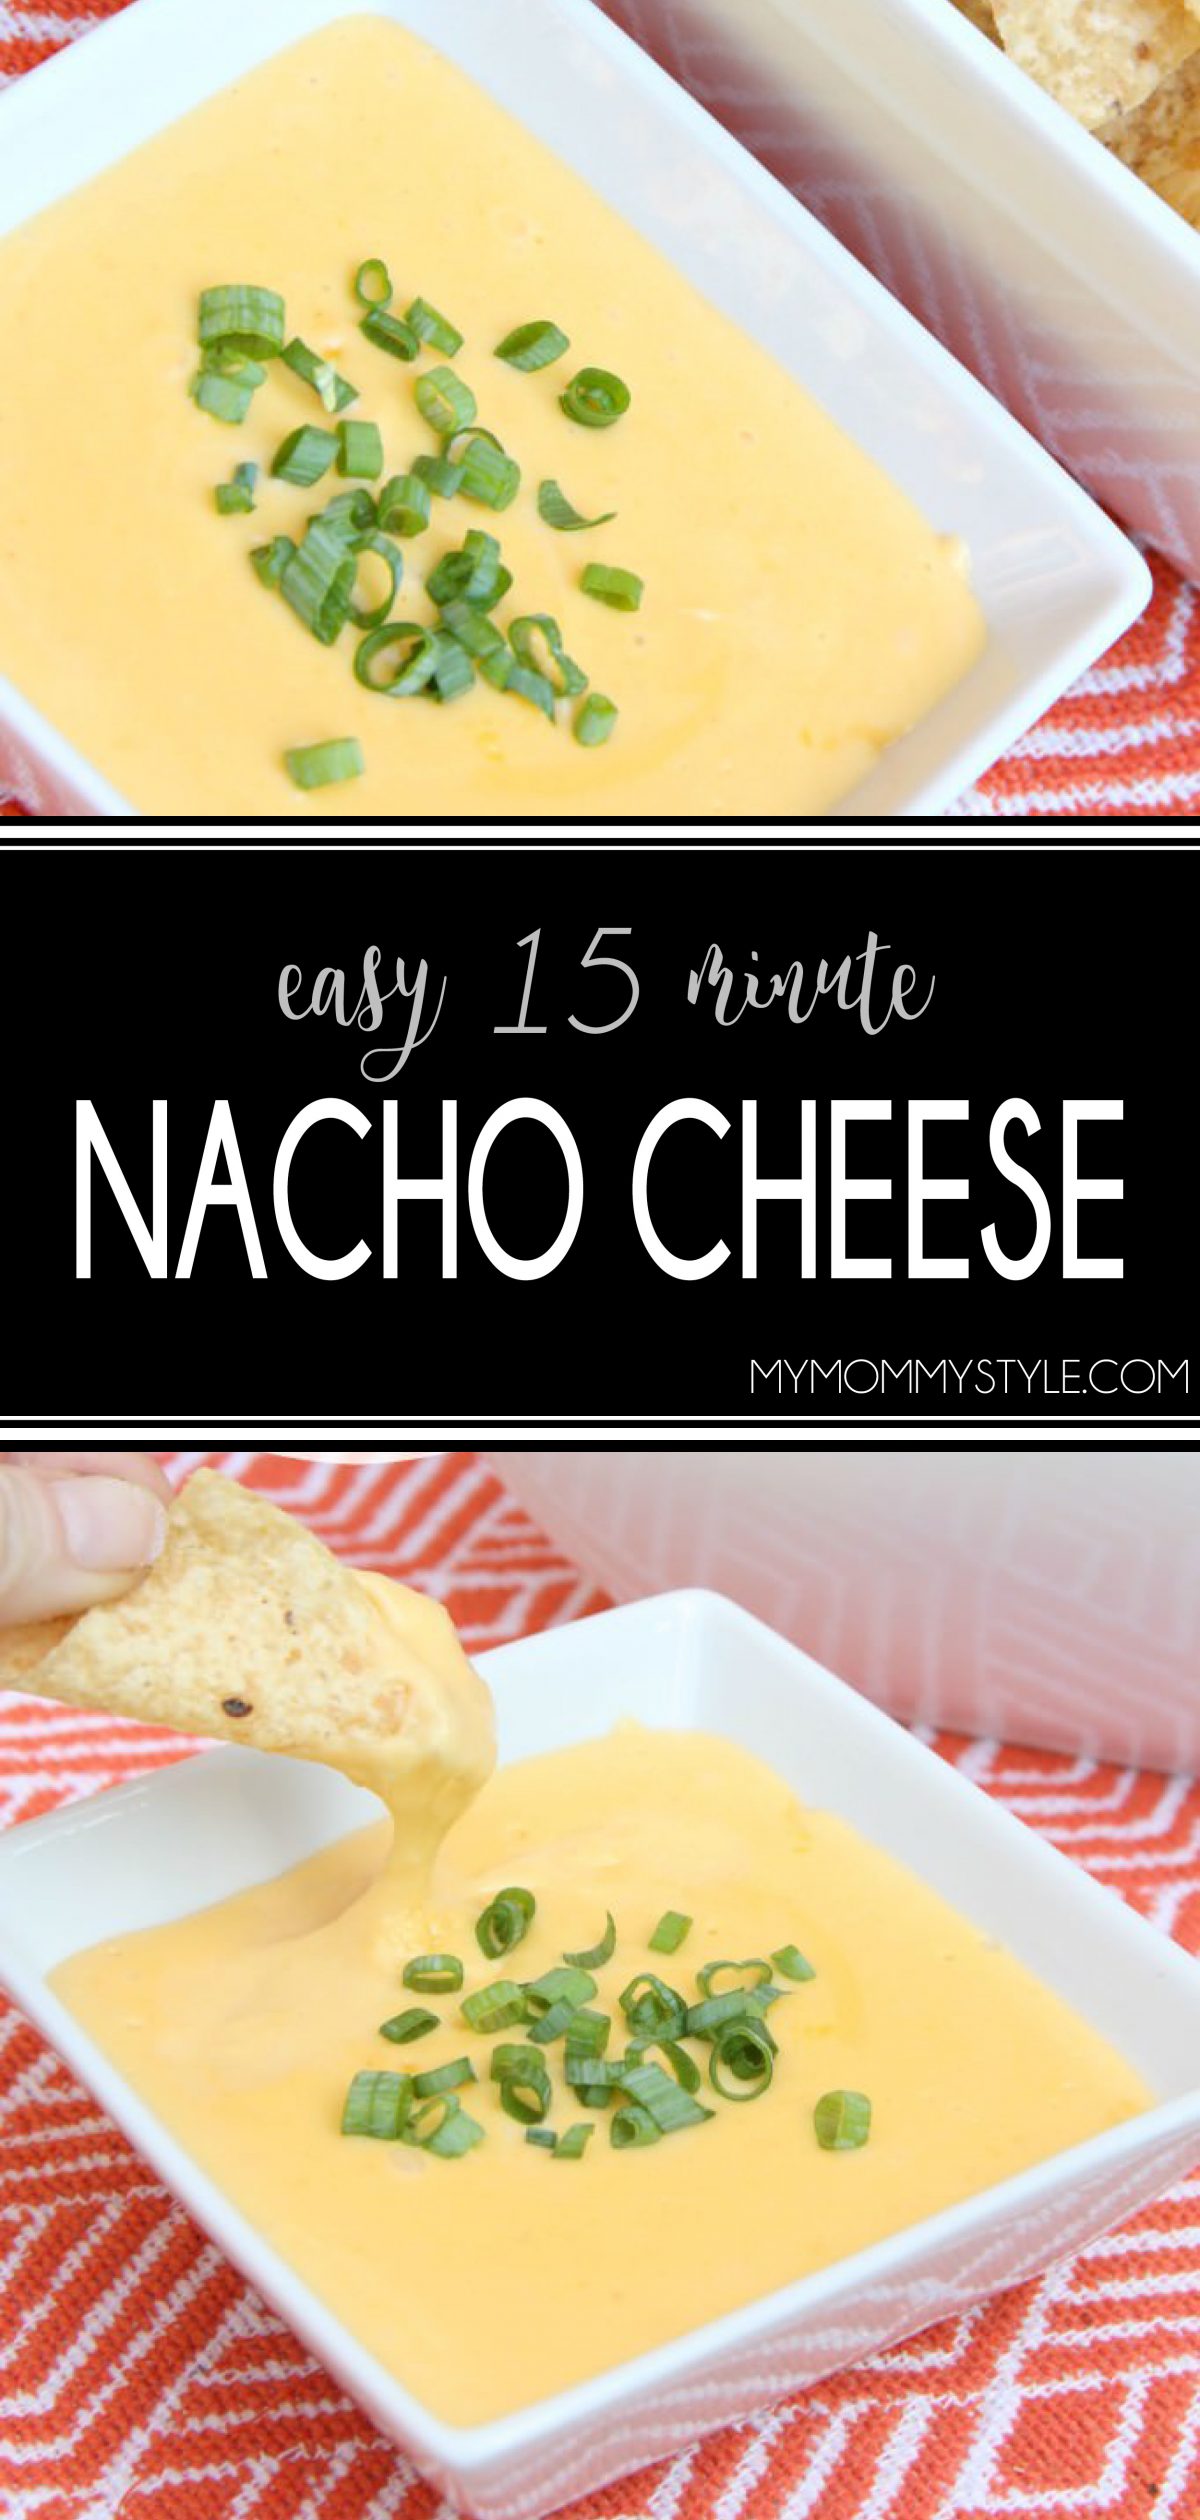 Homemade Nacho Cheese Sauce is fast and delicious made with real cheddar cheese. This creamy smooth dip is the perfect game day and party appetizer. via @mymommystyle